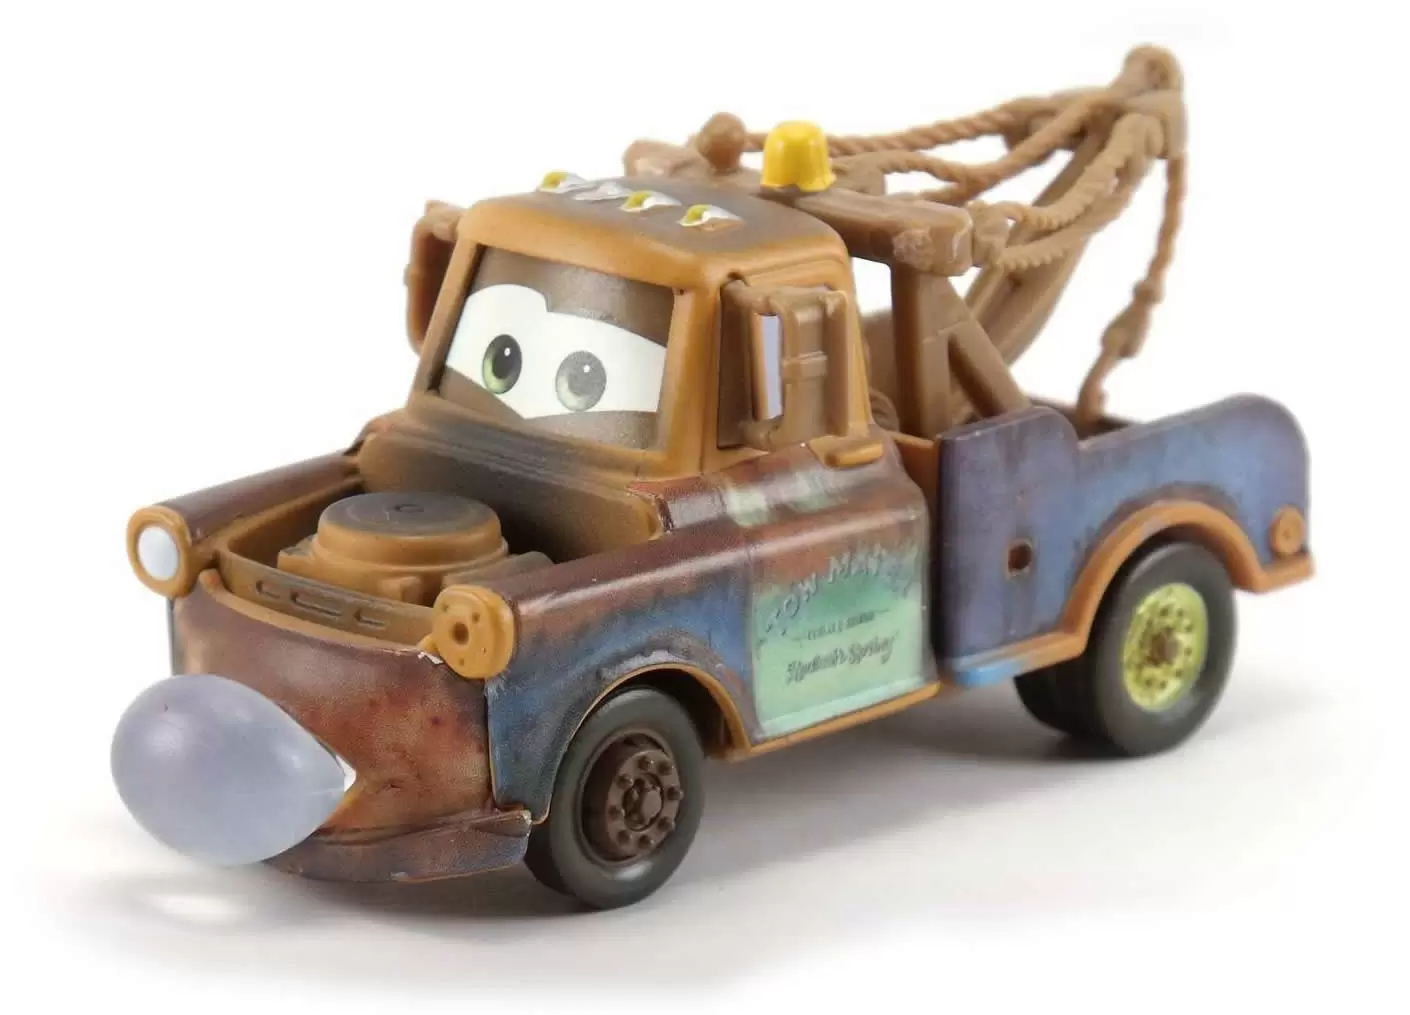 Cars 1 models - Blowing Bubble Mater